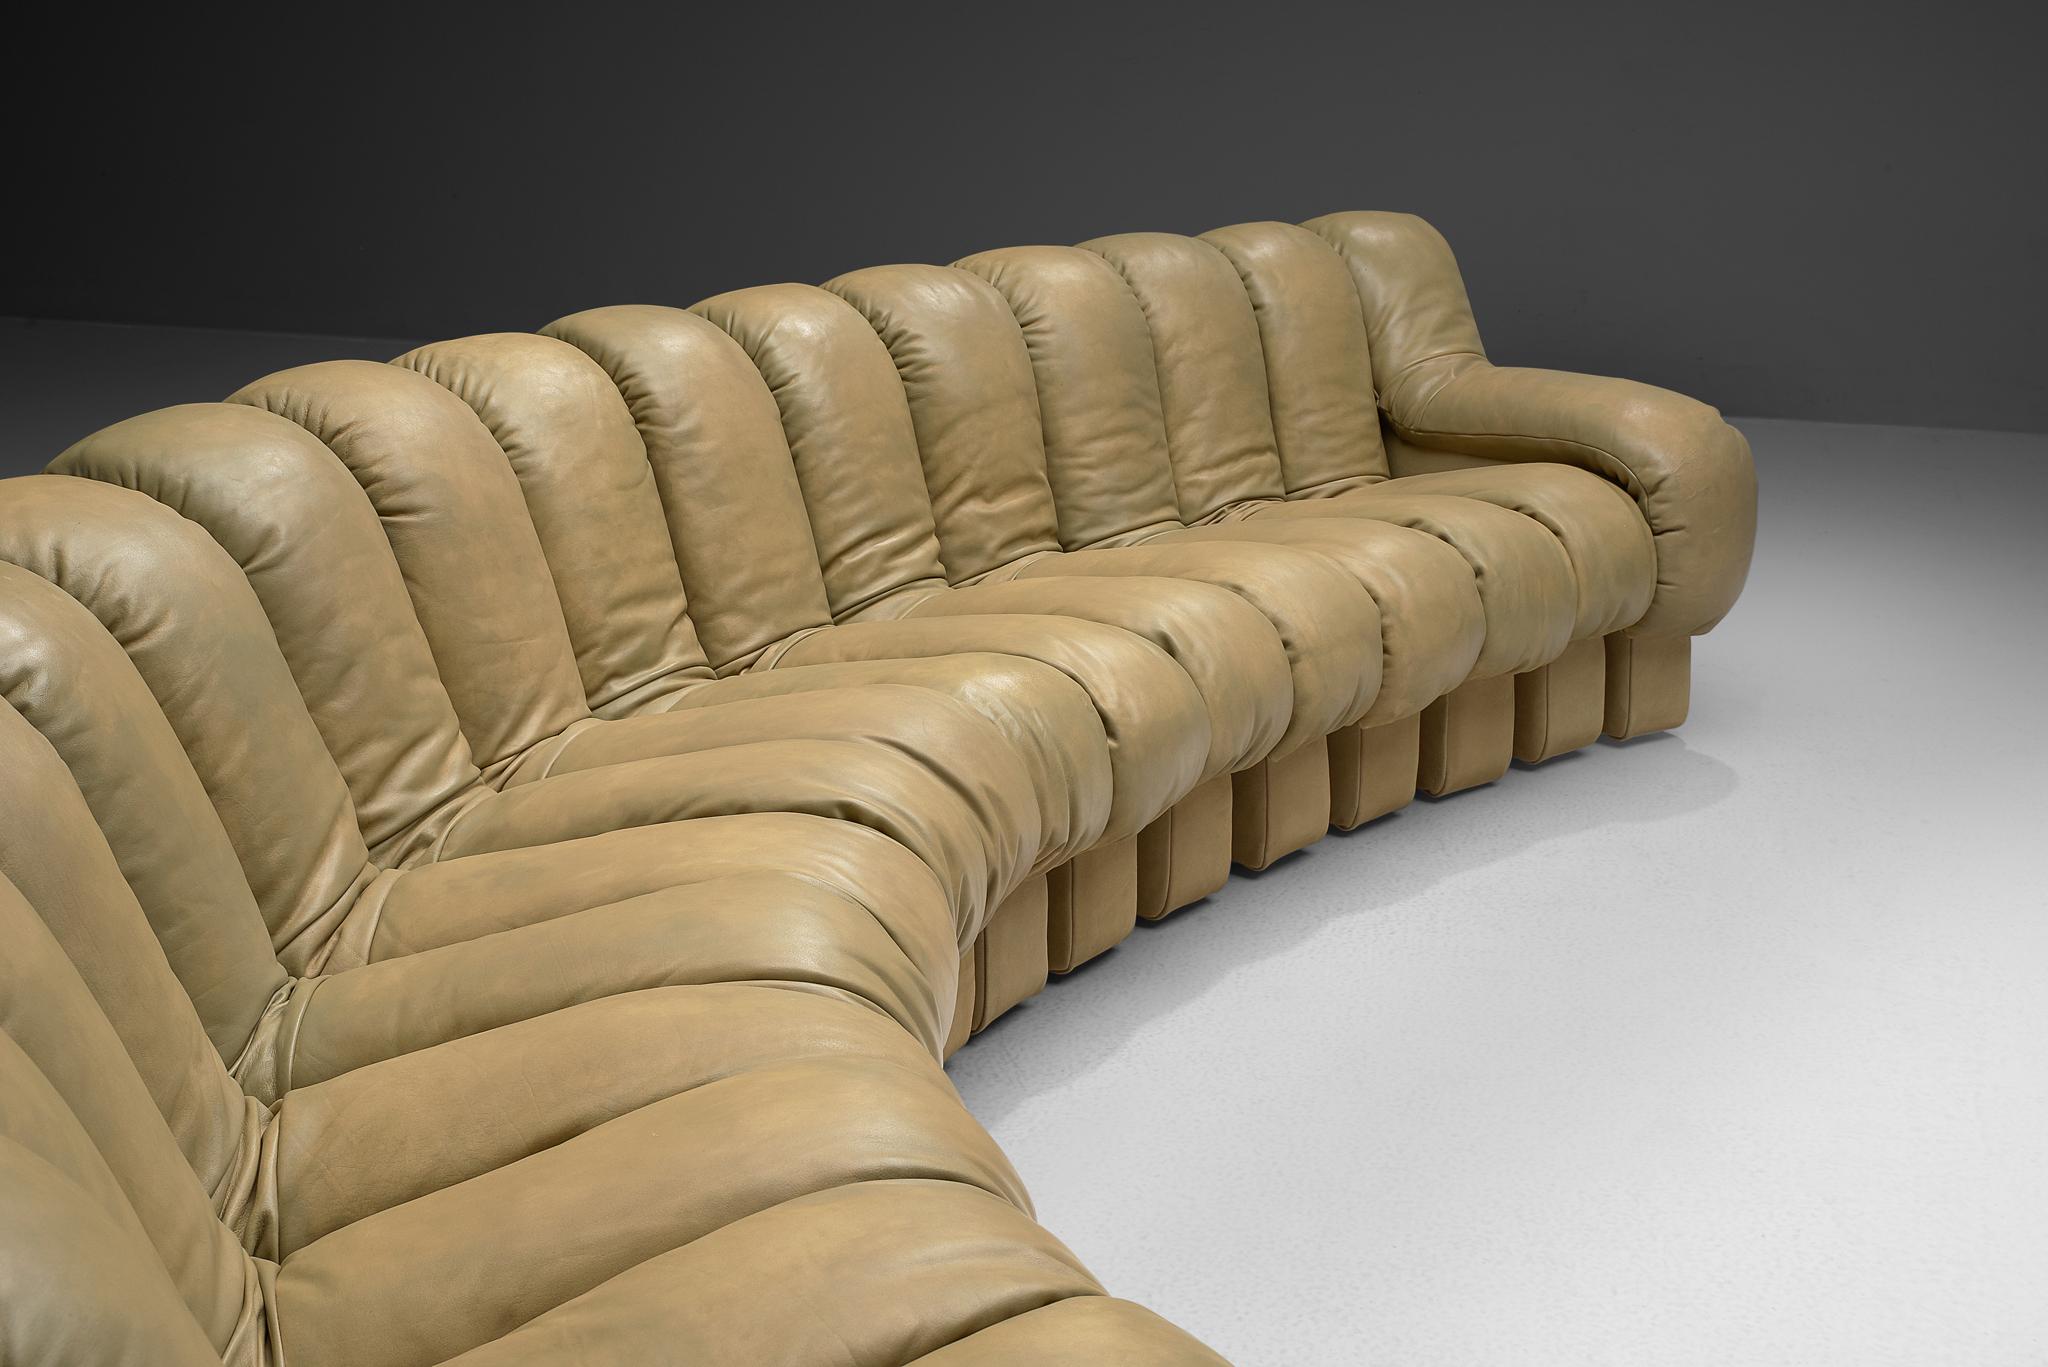 Swiss De Sede 'Snake' DS-600 Sofa in Beige Leather and Suede